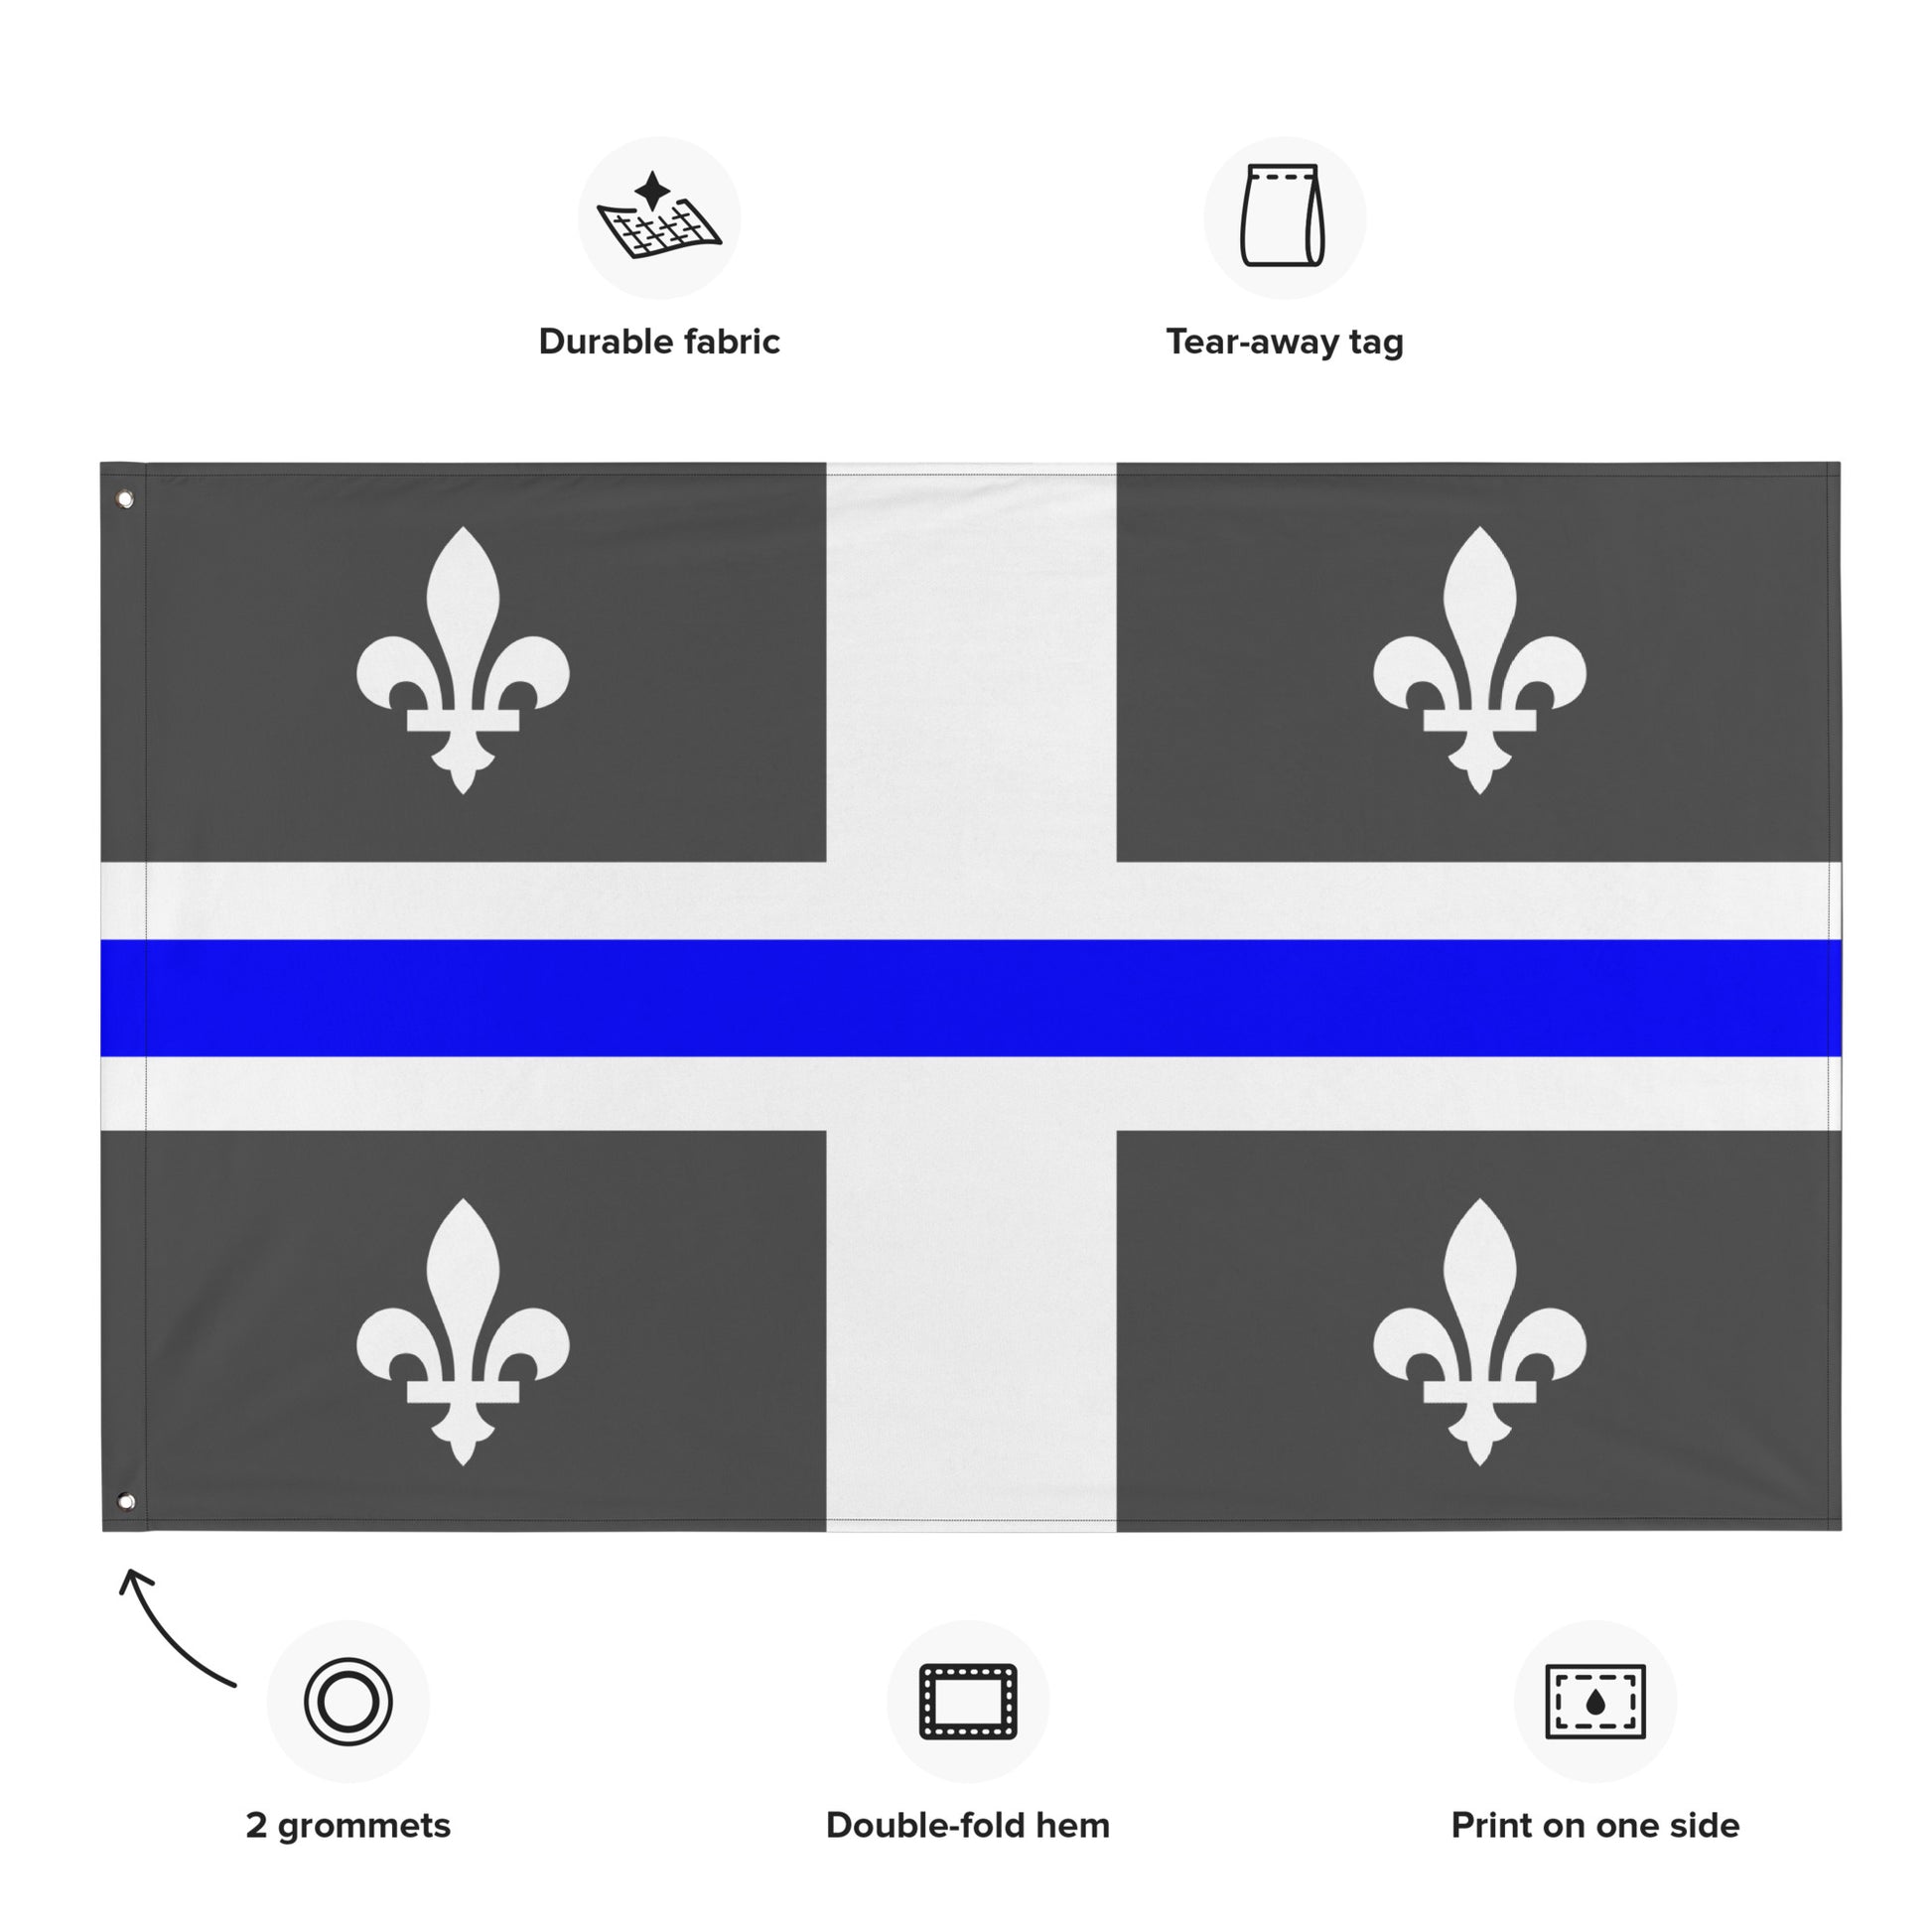 Subdued Quebec Thin Blue Line Canada Wall Flag-911 Duty Gear Canada-911 Duty Gear Canada